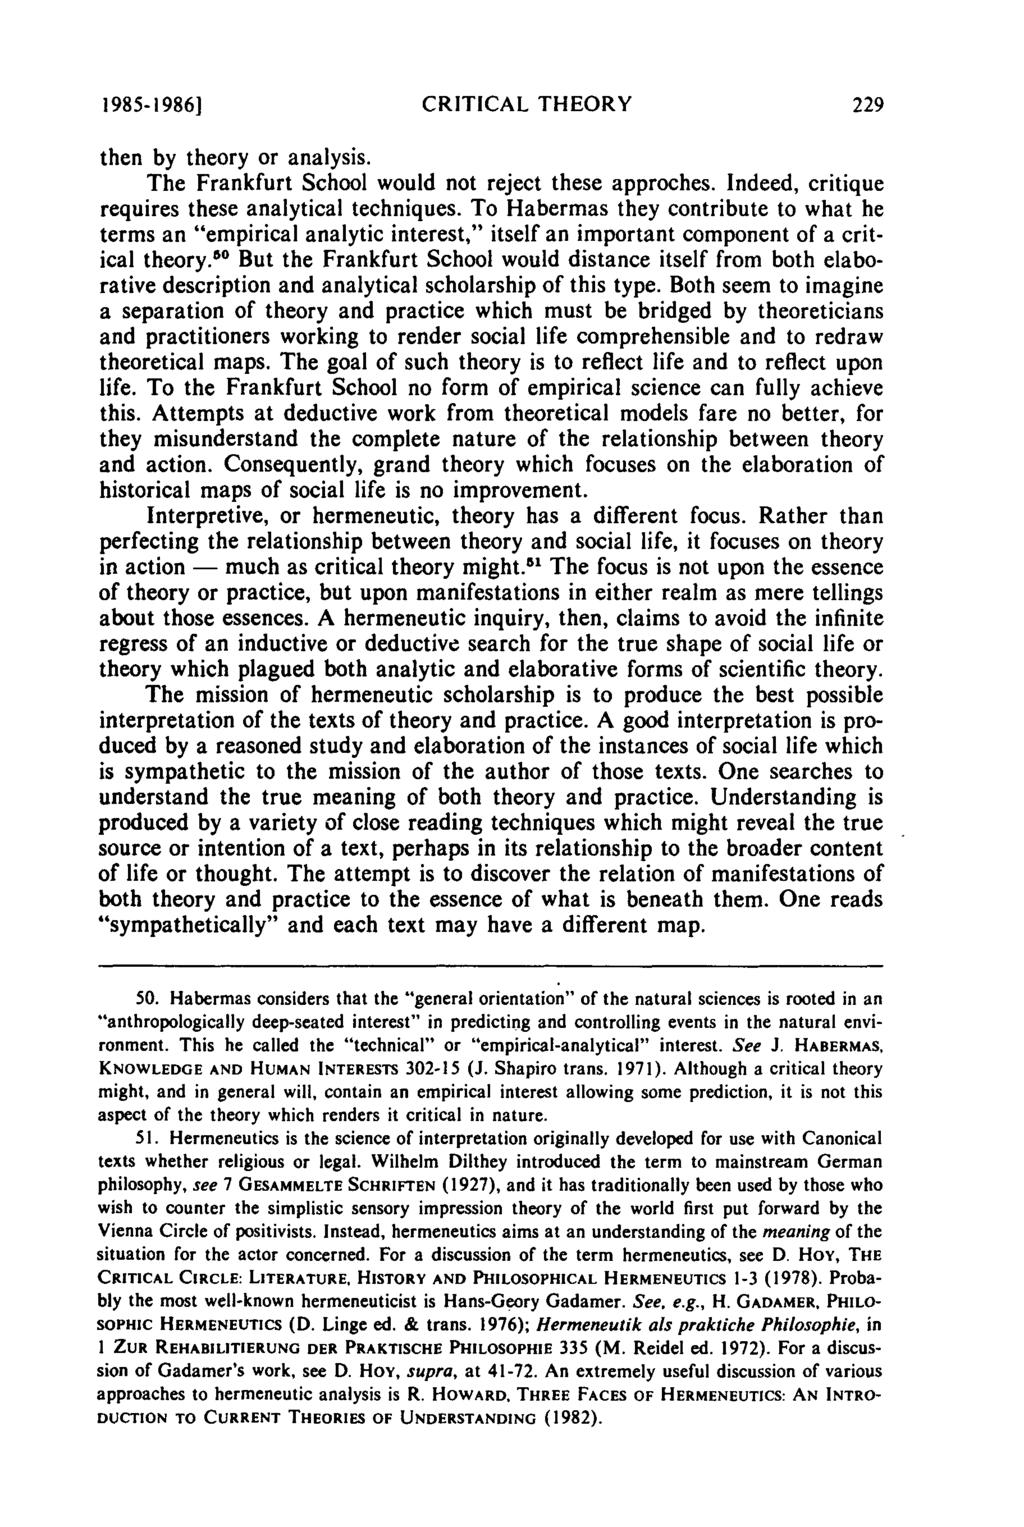 1985-1986] CRITICAL THEORY then by theory or analysis. The Frankfurt School would not reject these approches. Indeed, critique requires these analytical techniques.